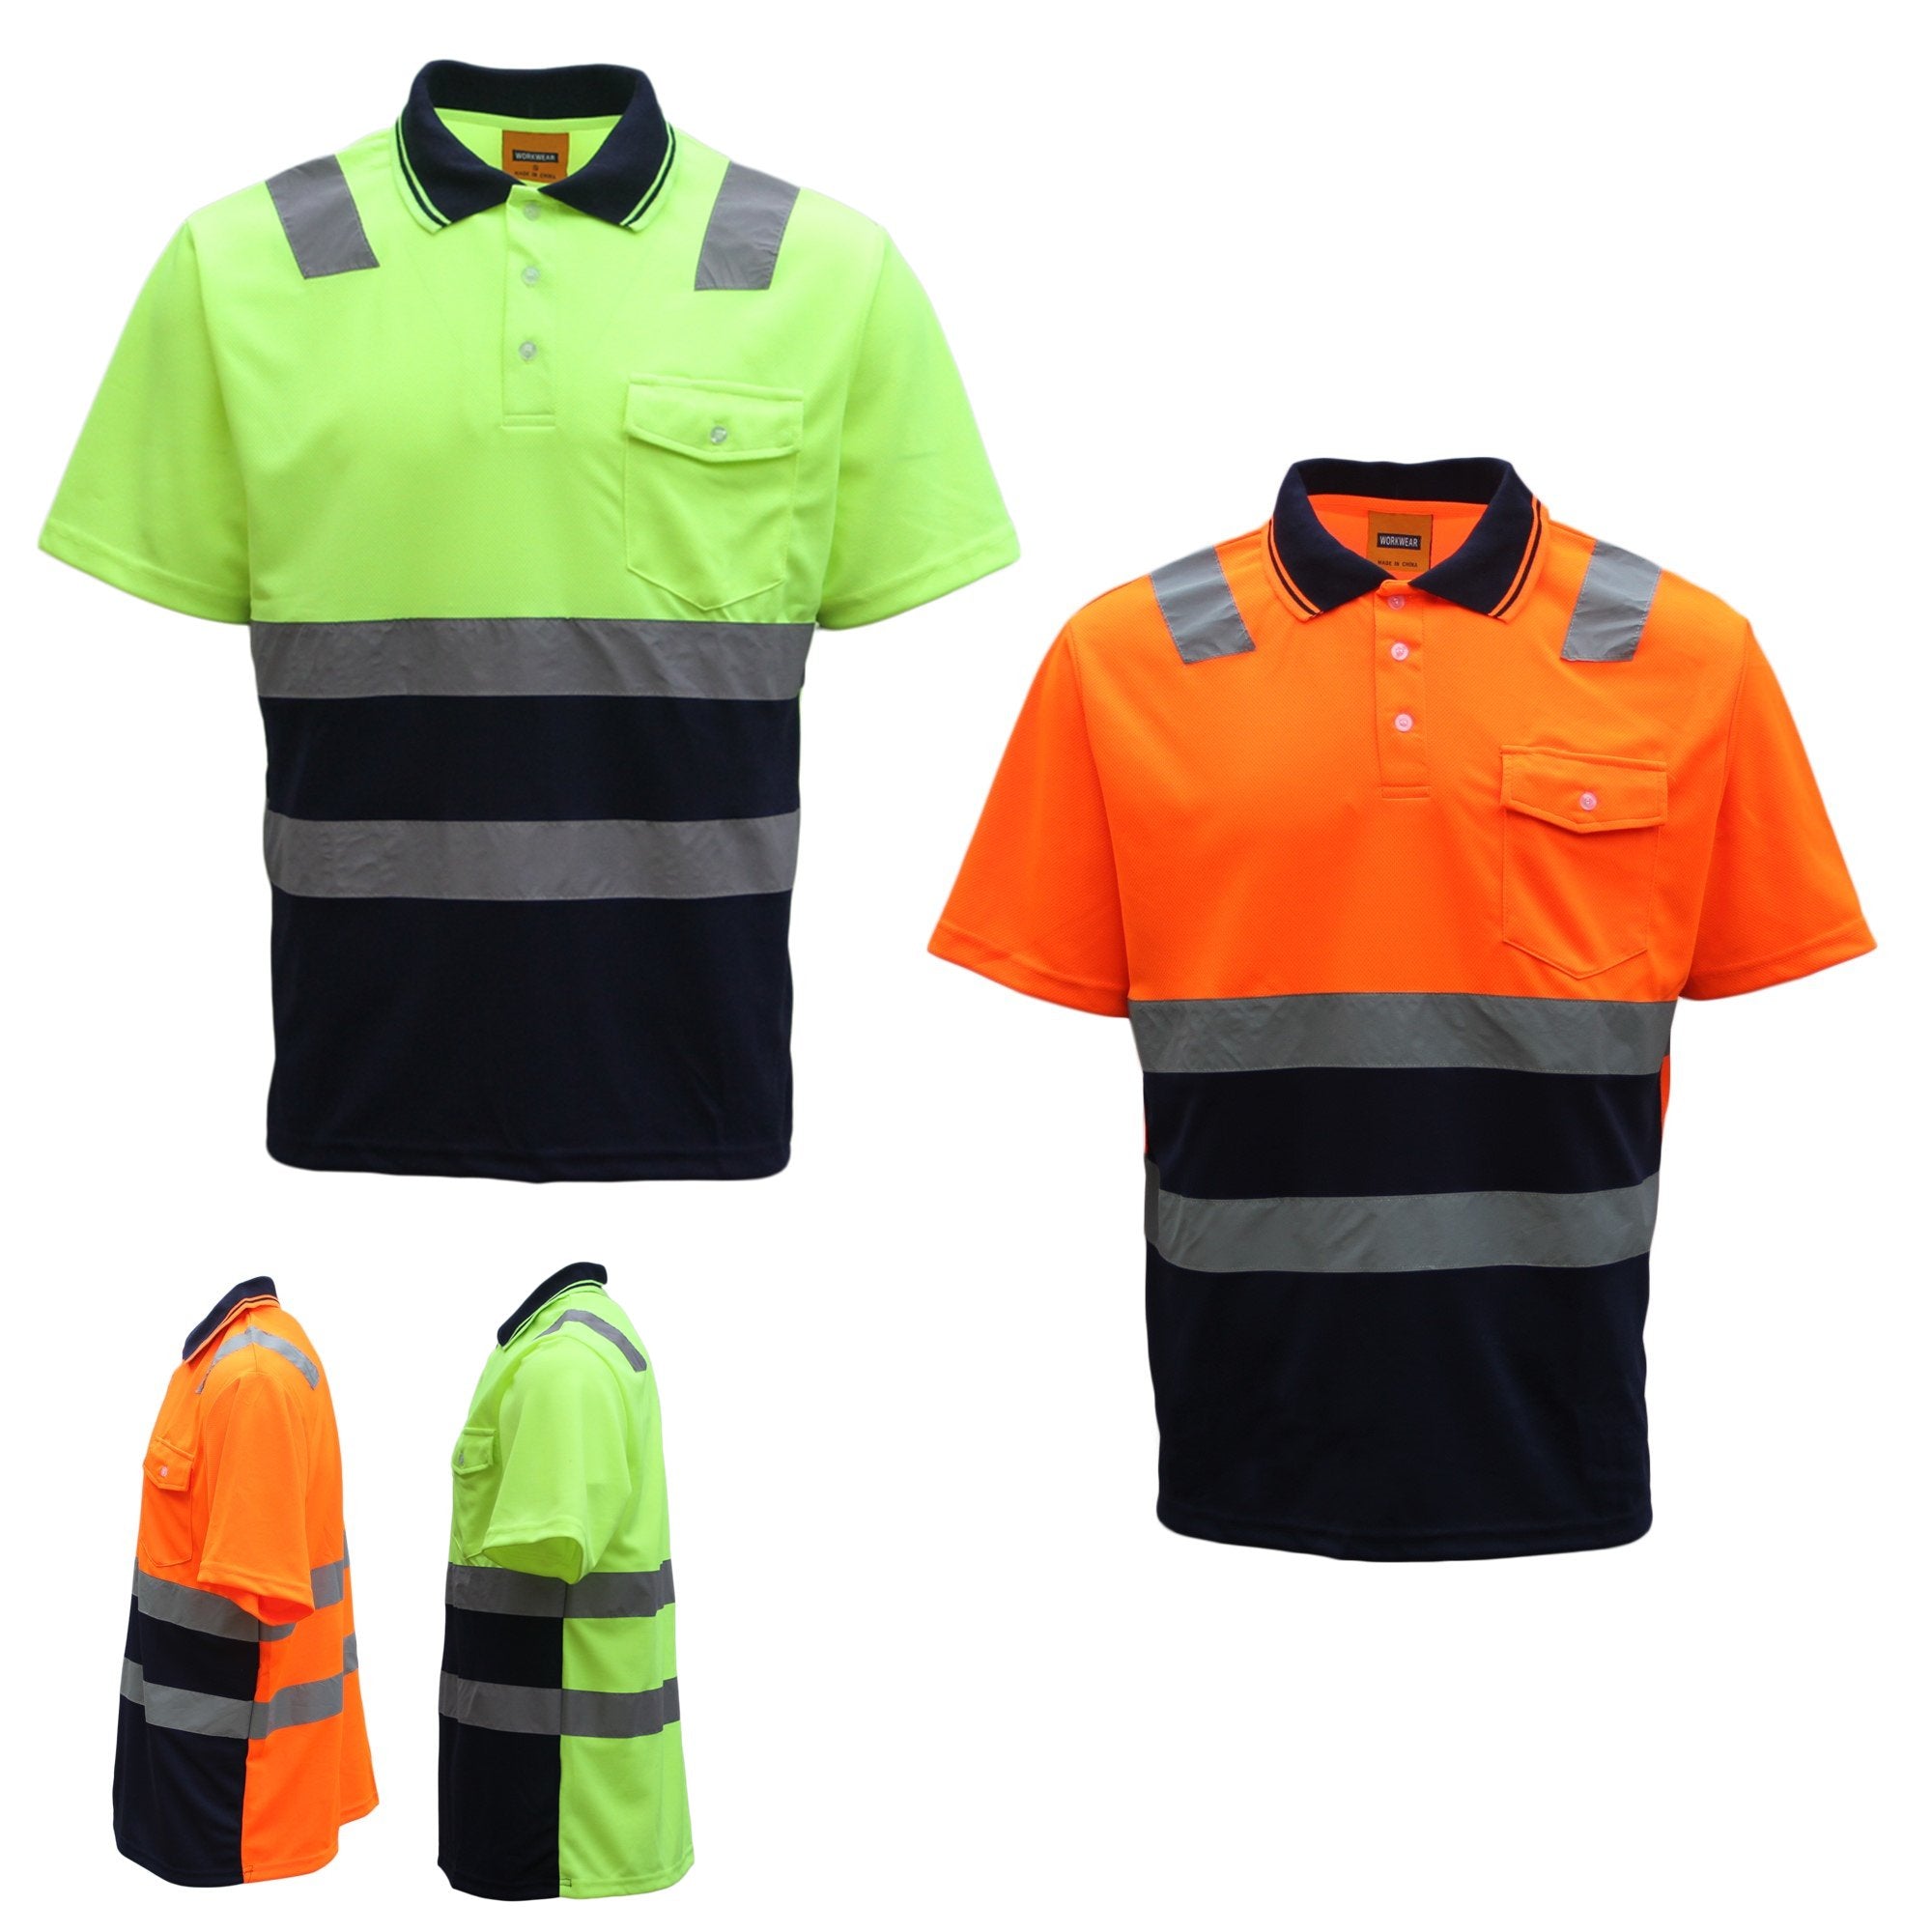 HI VIS Short Sleeve Workwear Shirt w Reflective Tape Cool Dry Safety Polo 2 Tone, Fluoro Yellow / Navy, XL